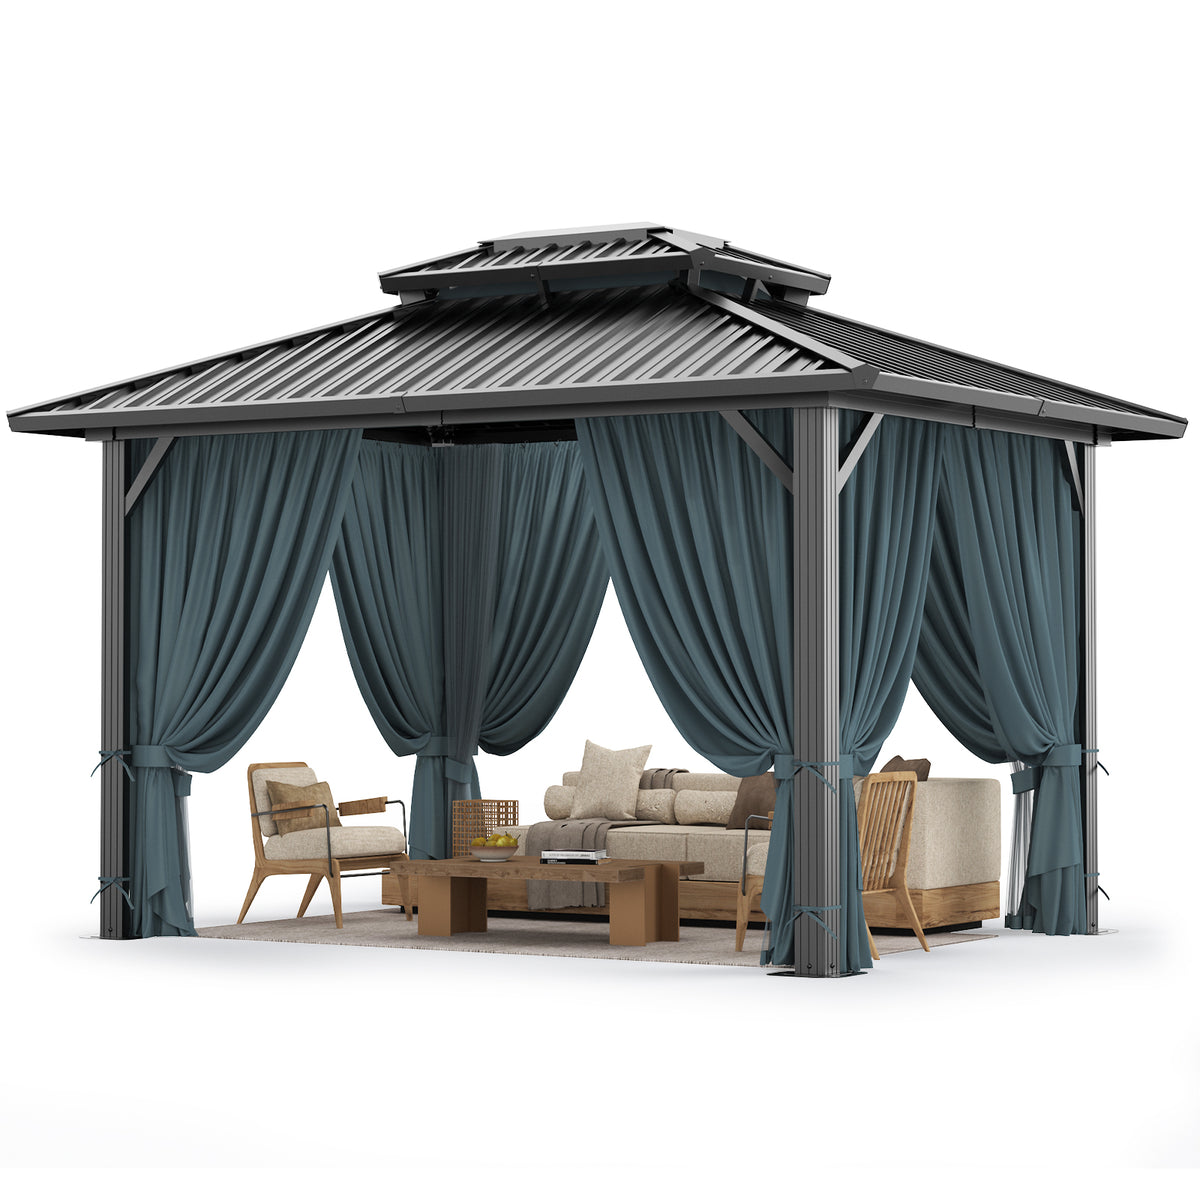 Hoteel 10'x12' Hardtop Gazebo, Outdoor Steel Double Galvanized Roof Canopy, Aluminum Frame Permanent Pavilion Metal Gazebo with Curtains and Nettings, Sunshade for Patios, Gardens, Lawns, Brown